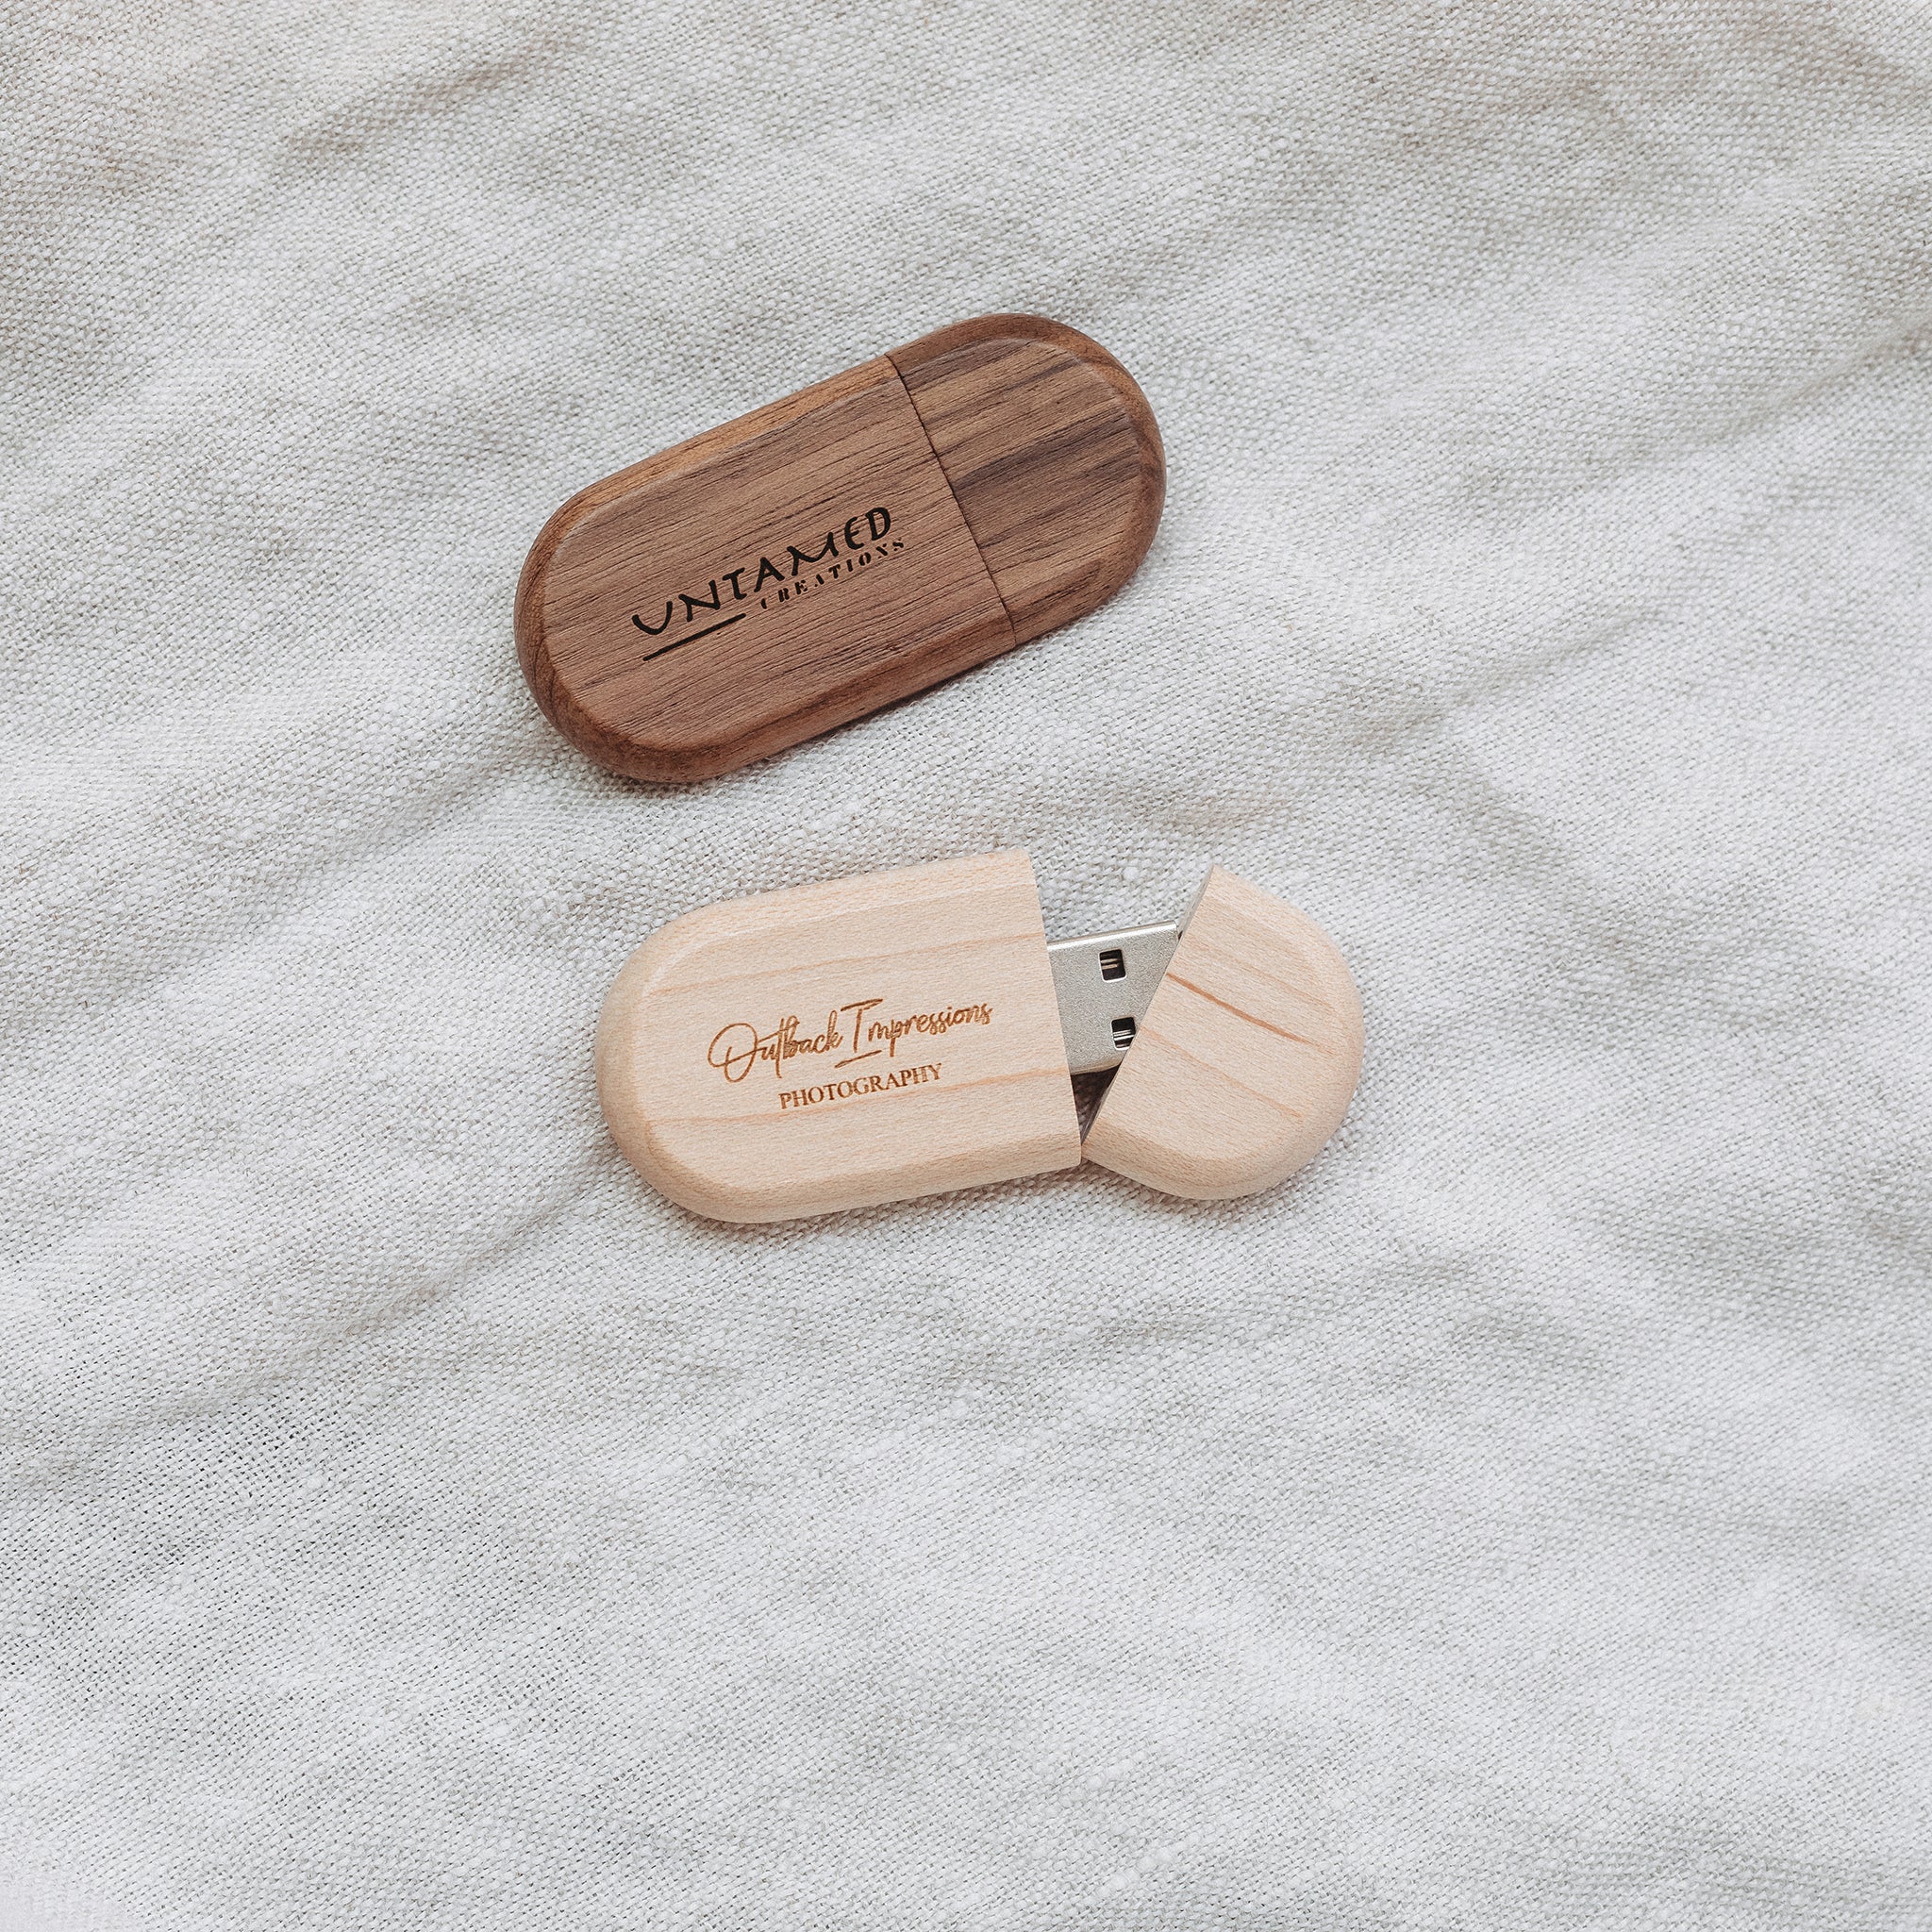 Oval Wood USB Stick Printed or Embossed - Crazy Dave Promo UK